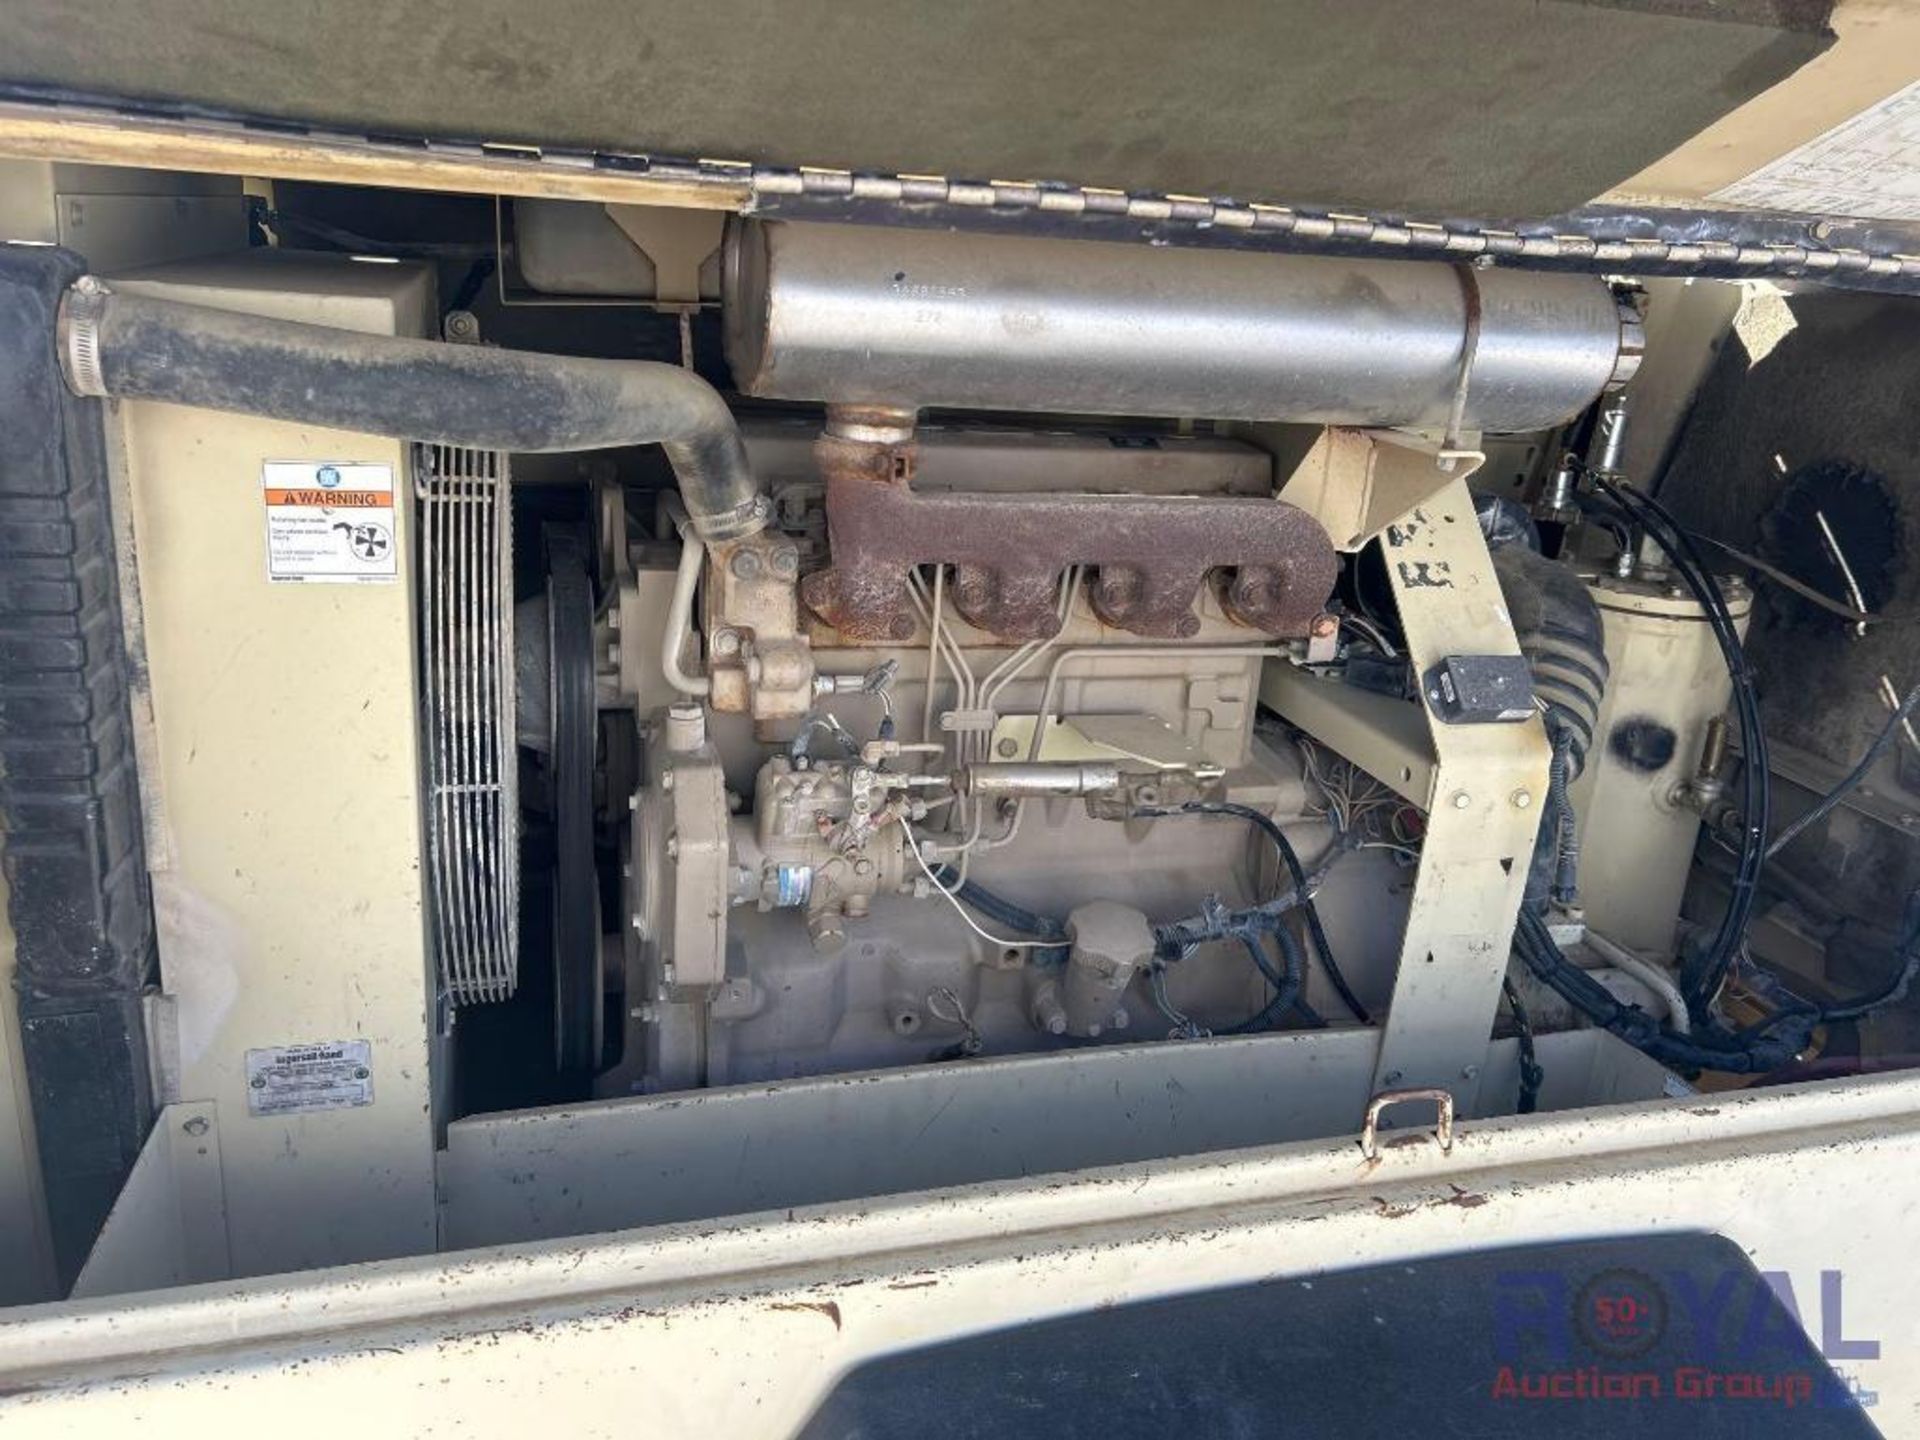 2001 Ingersoll Rand 185 CFM Towable Air Compressor - Image 12 of 19